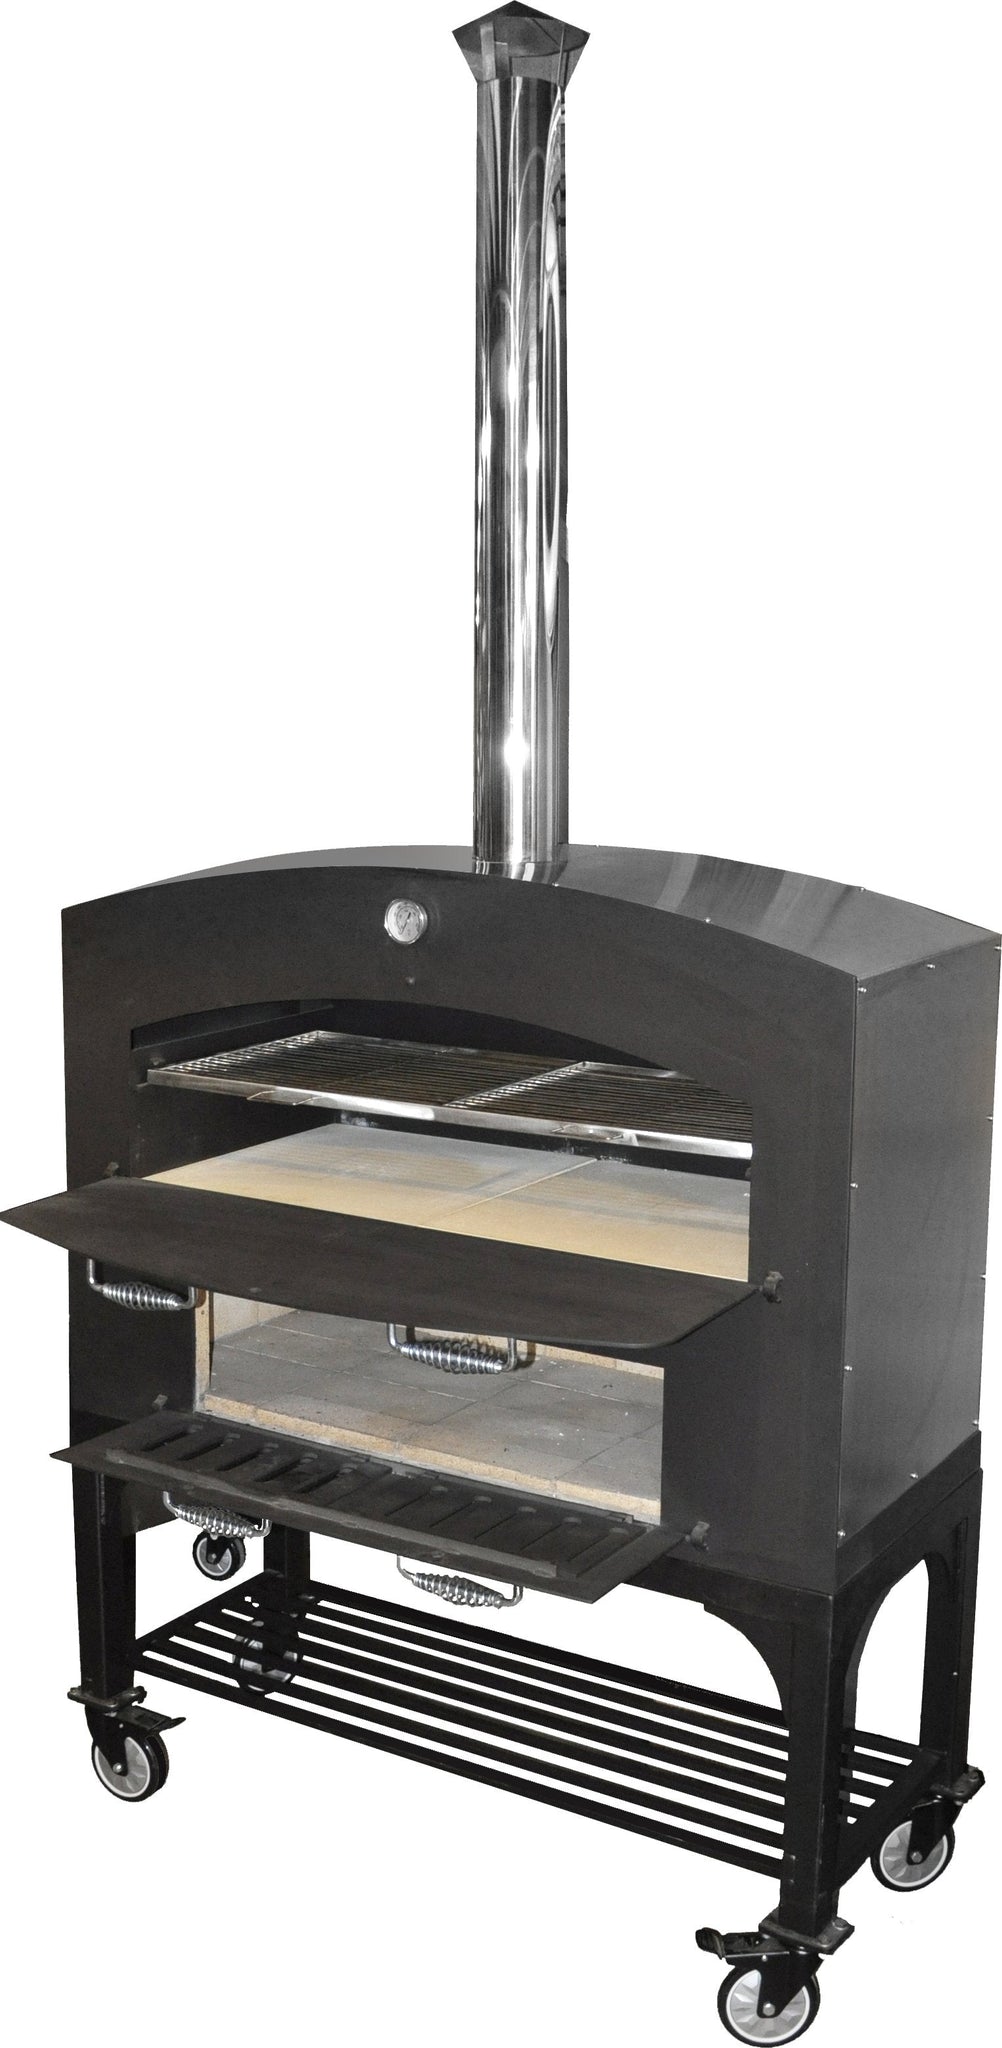 Omcan - 46" Outdoor Wood Burning Oven - CE-CN-1677